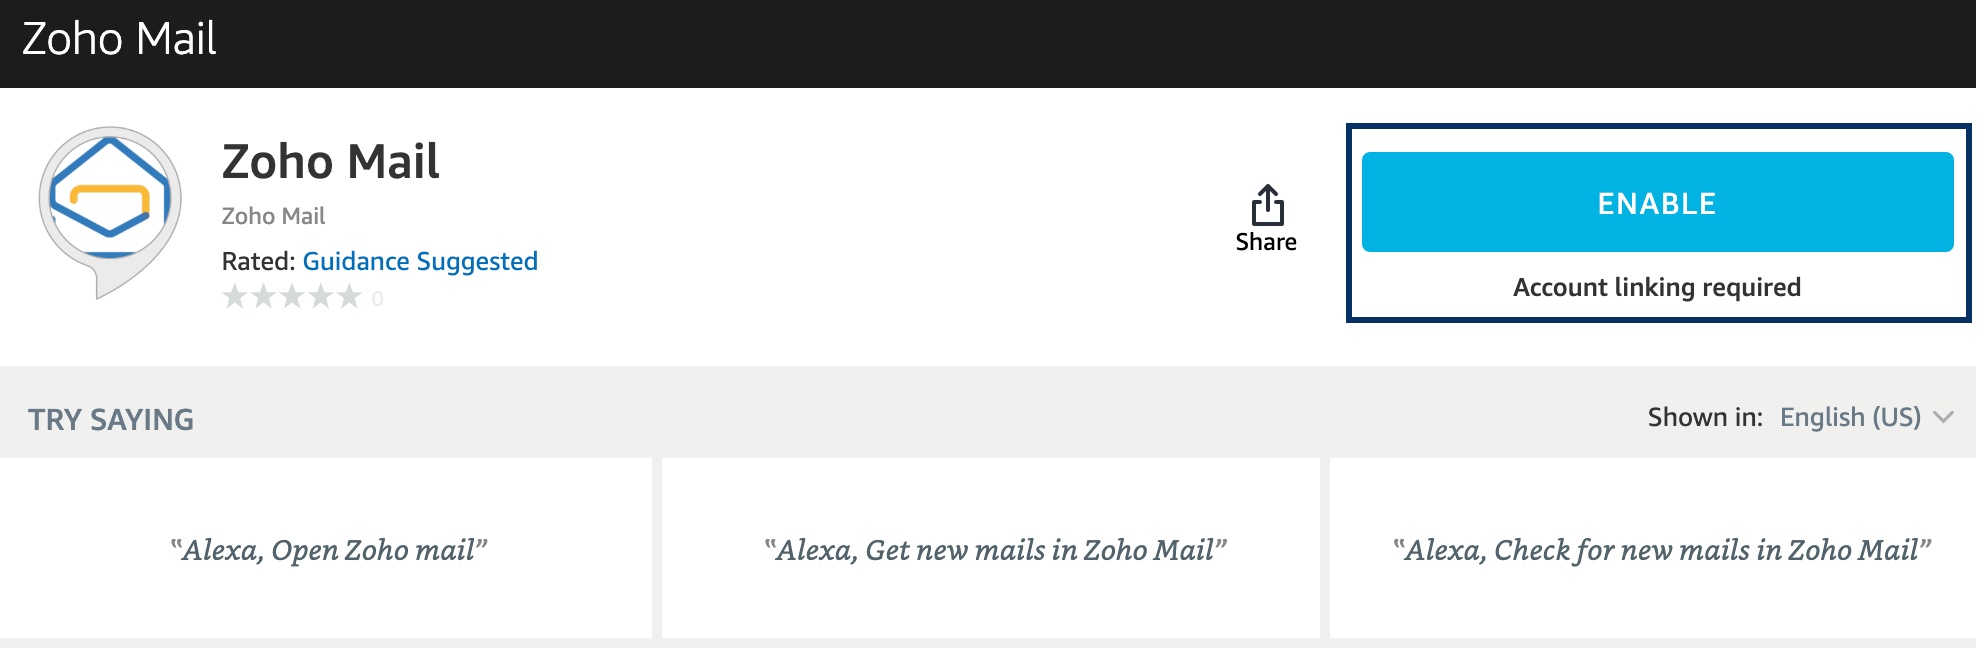 Enable Zoho Mail on your Alexa